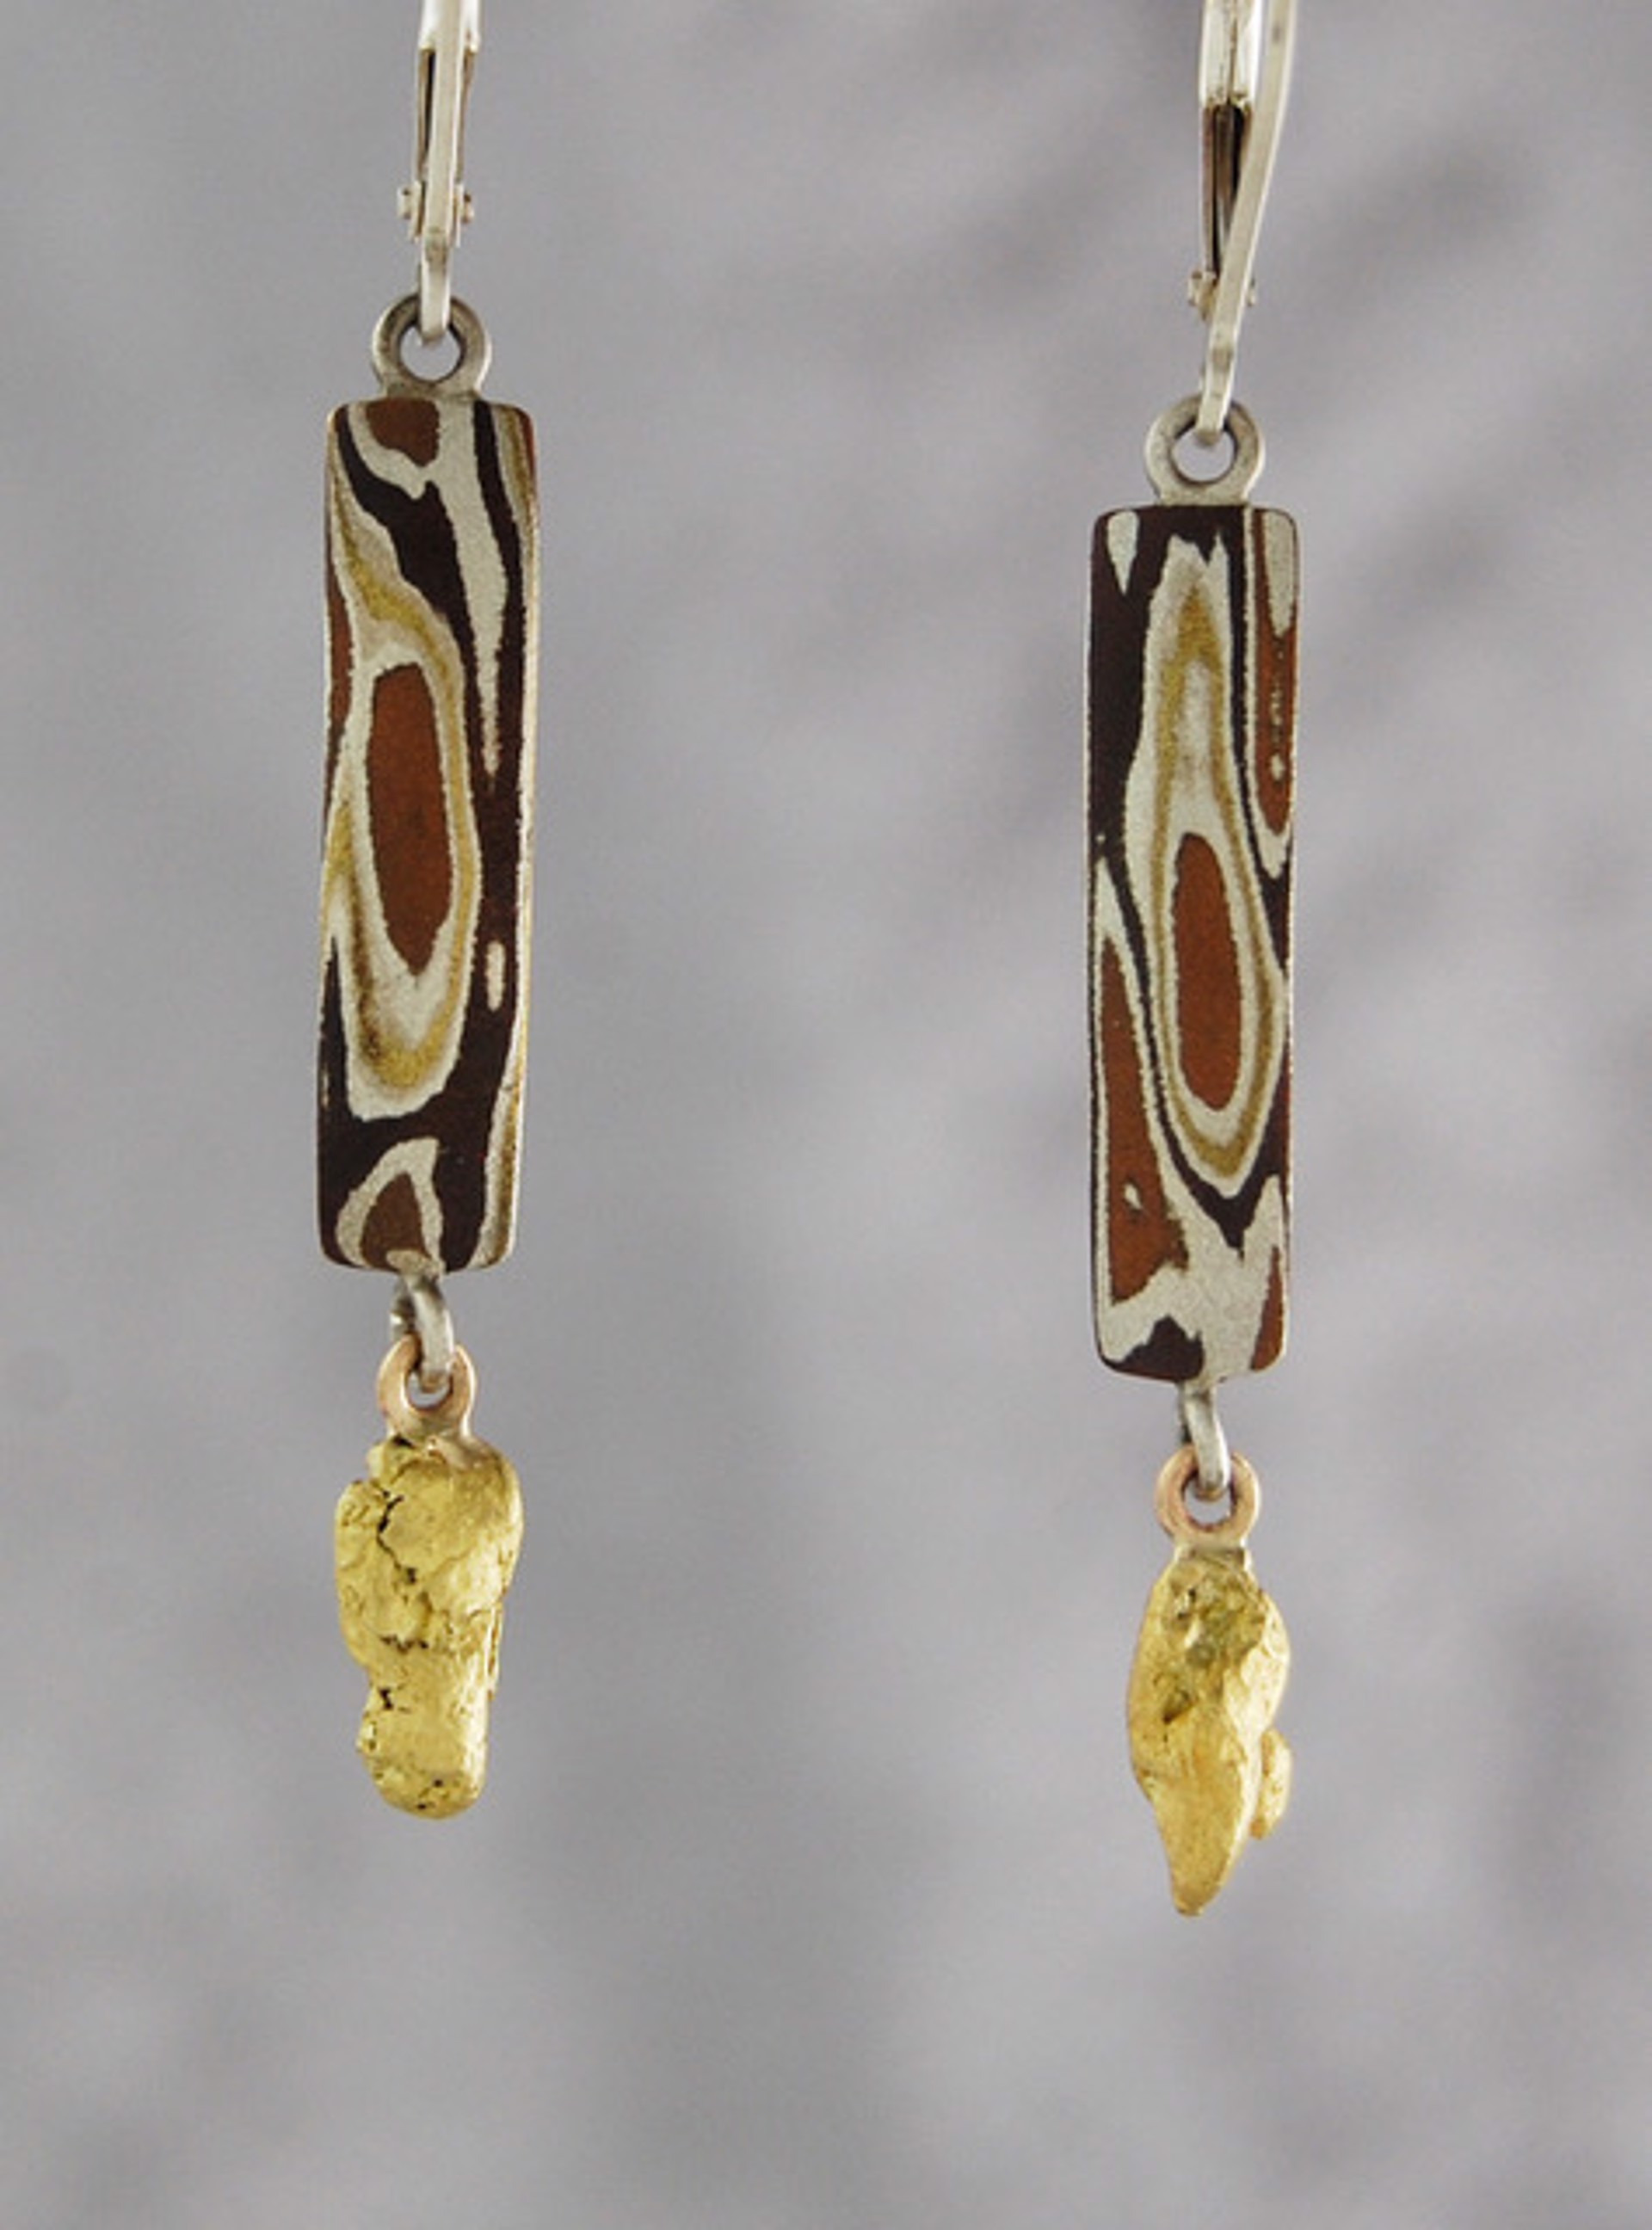 Earrings - Mokume Gane With Natural Gold Nuggets Sterling Silver Lever Backs - #297 by Ken and Barbara Newman